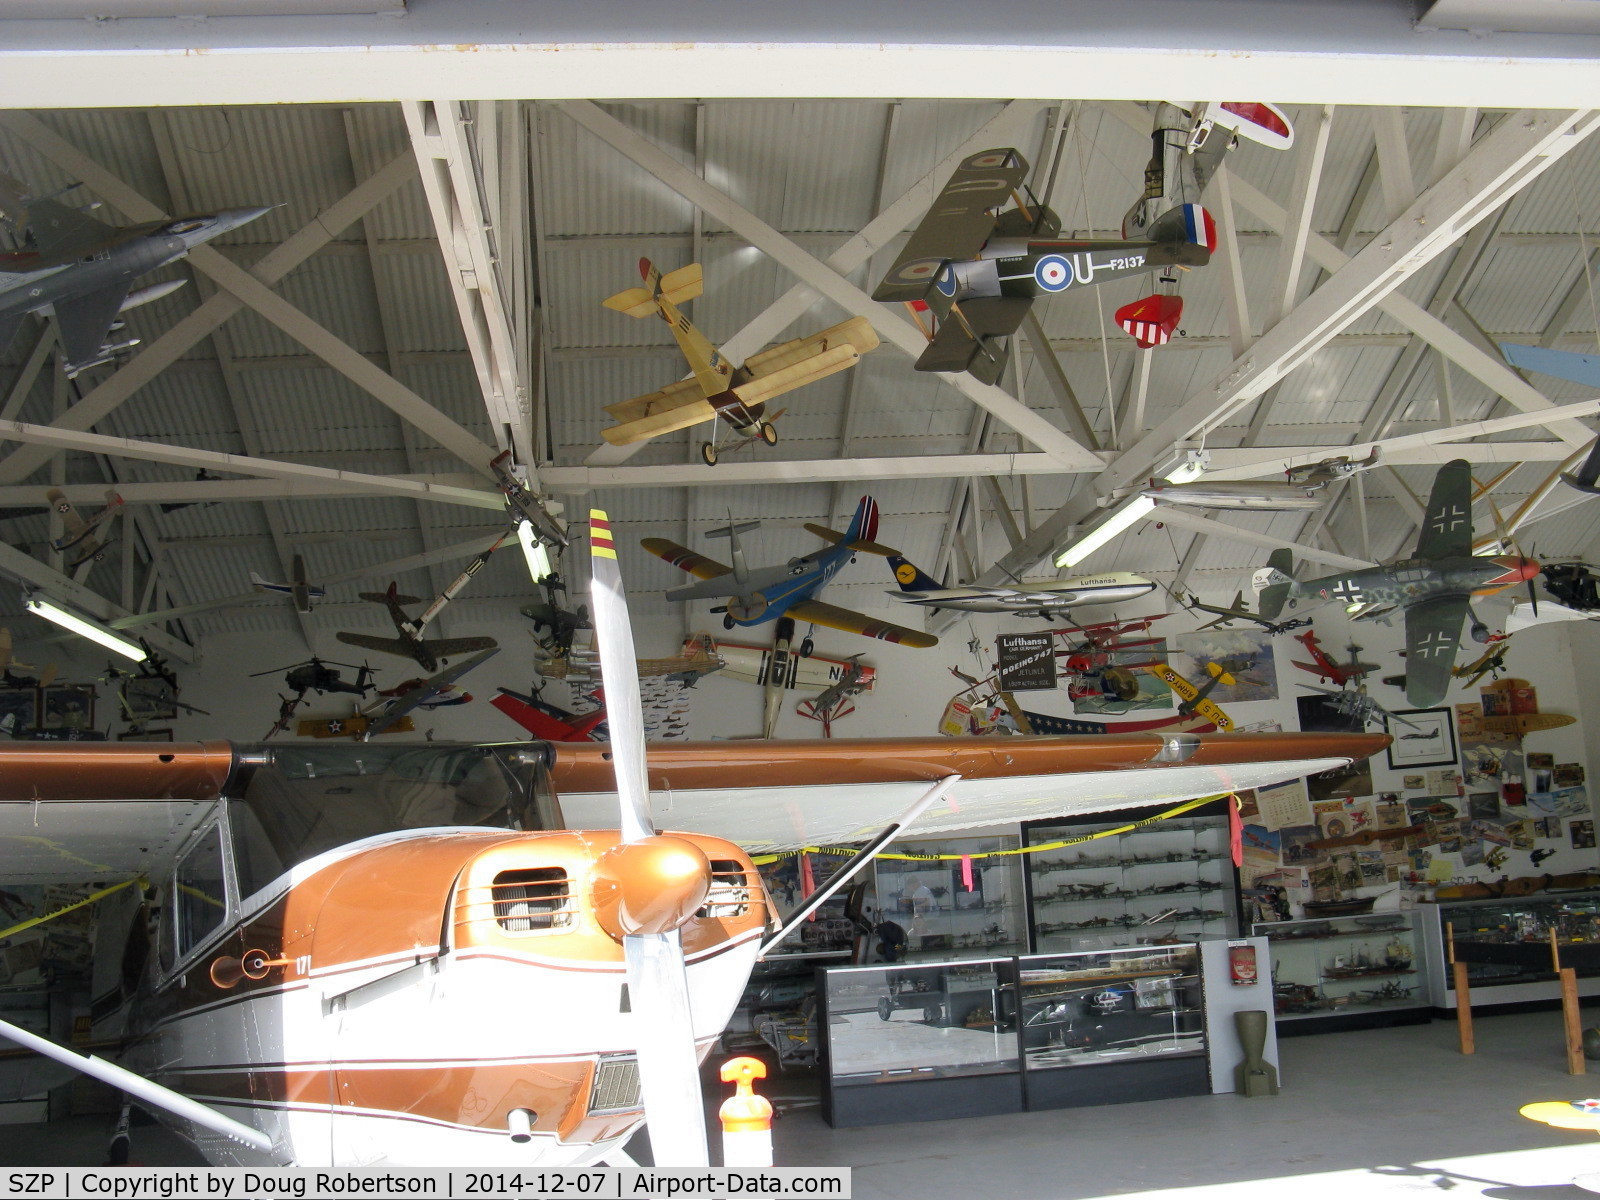 Santa Paula Airport (SZP) - 12 CURTISS TAXI, huge collection of model aircraft on public display